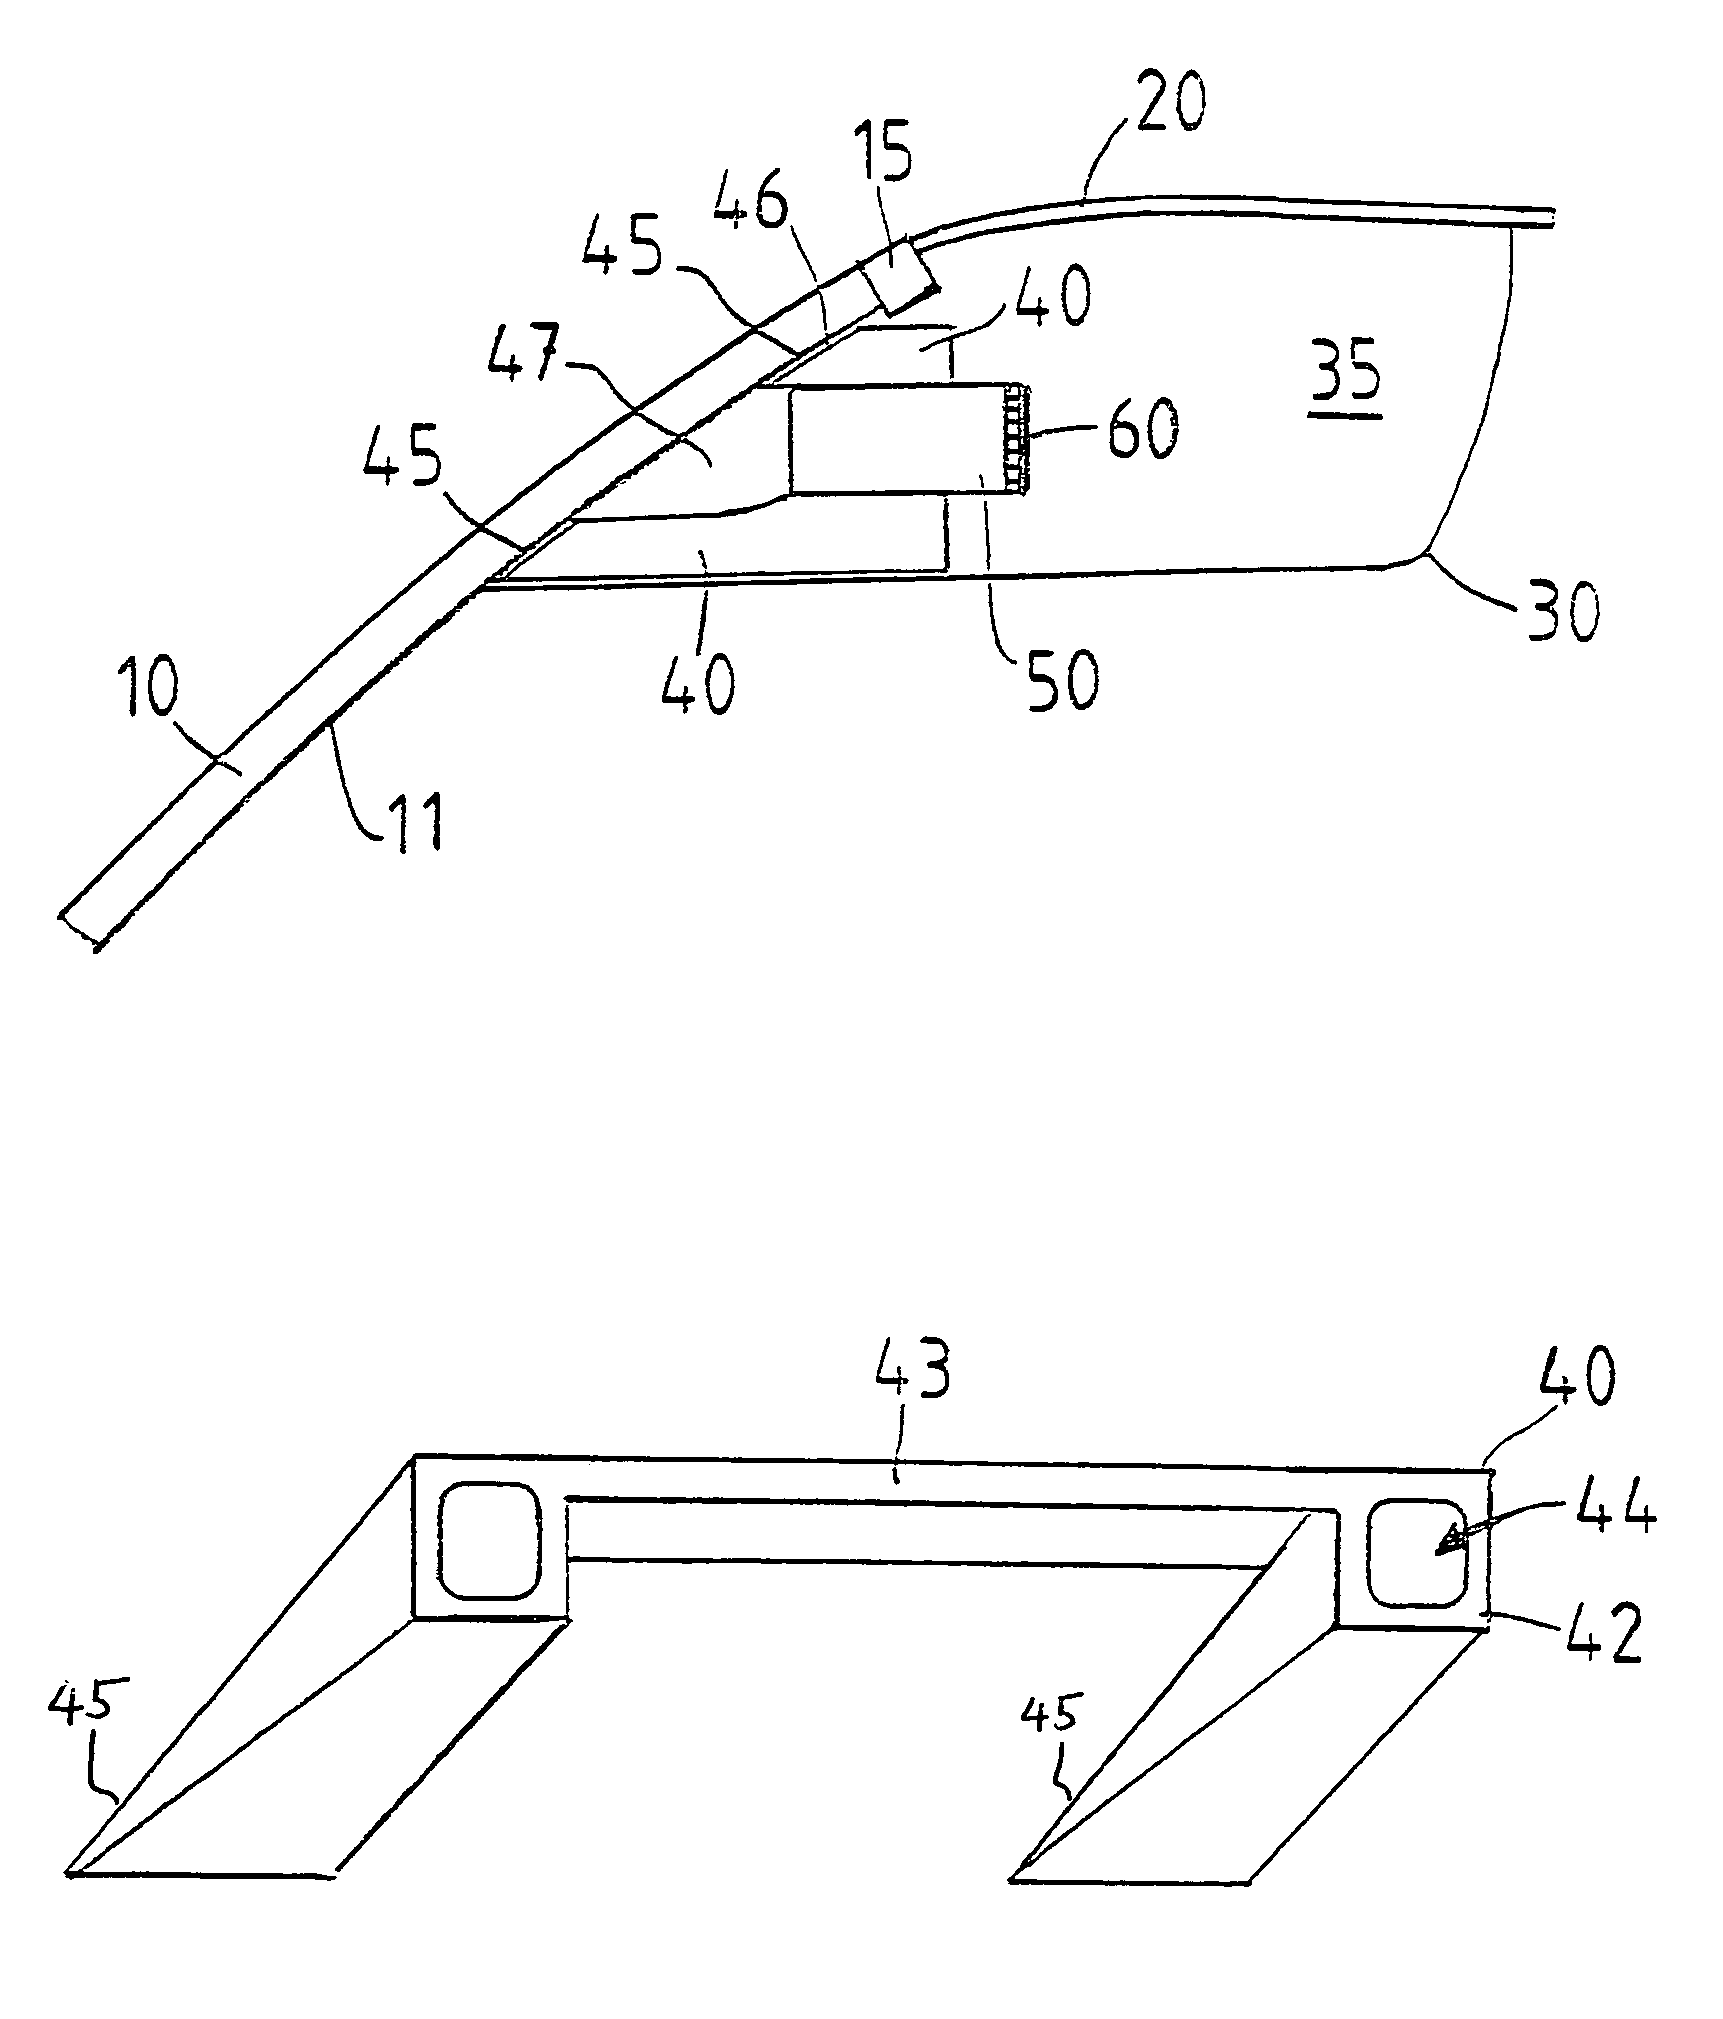 Stereo camera arrangement in a motor vehicle